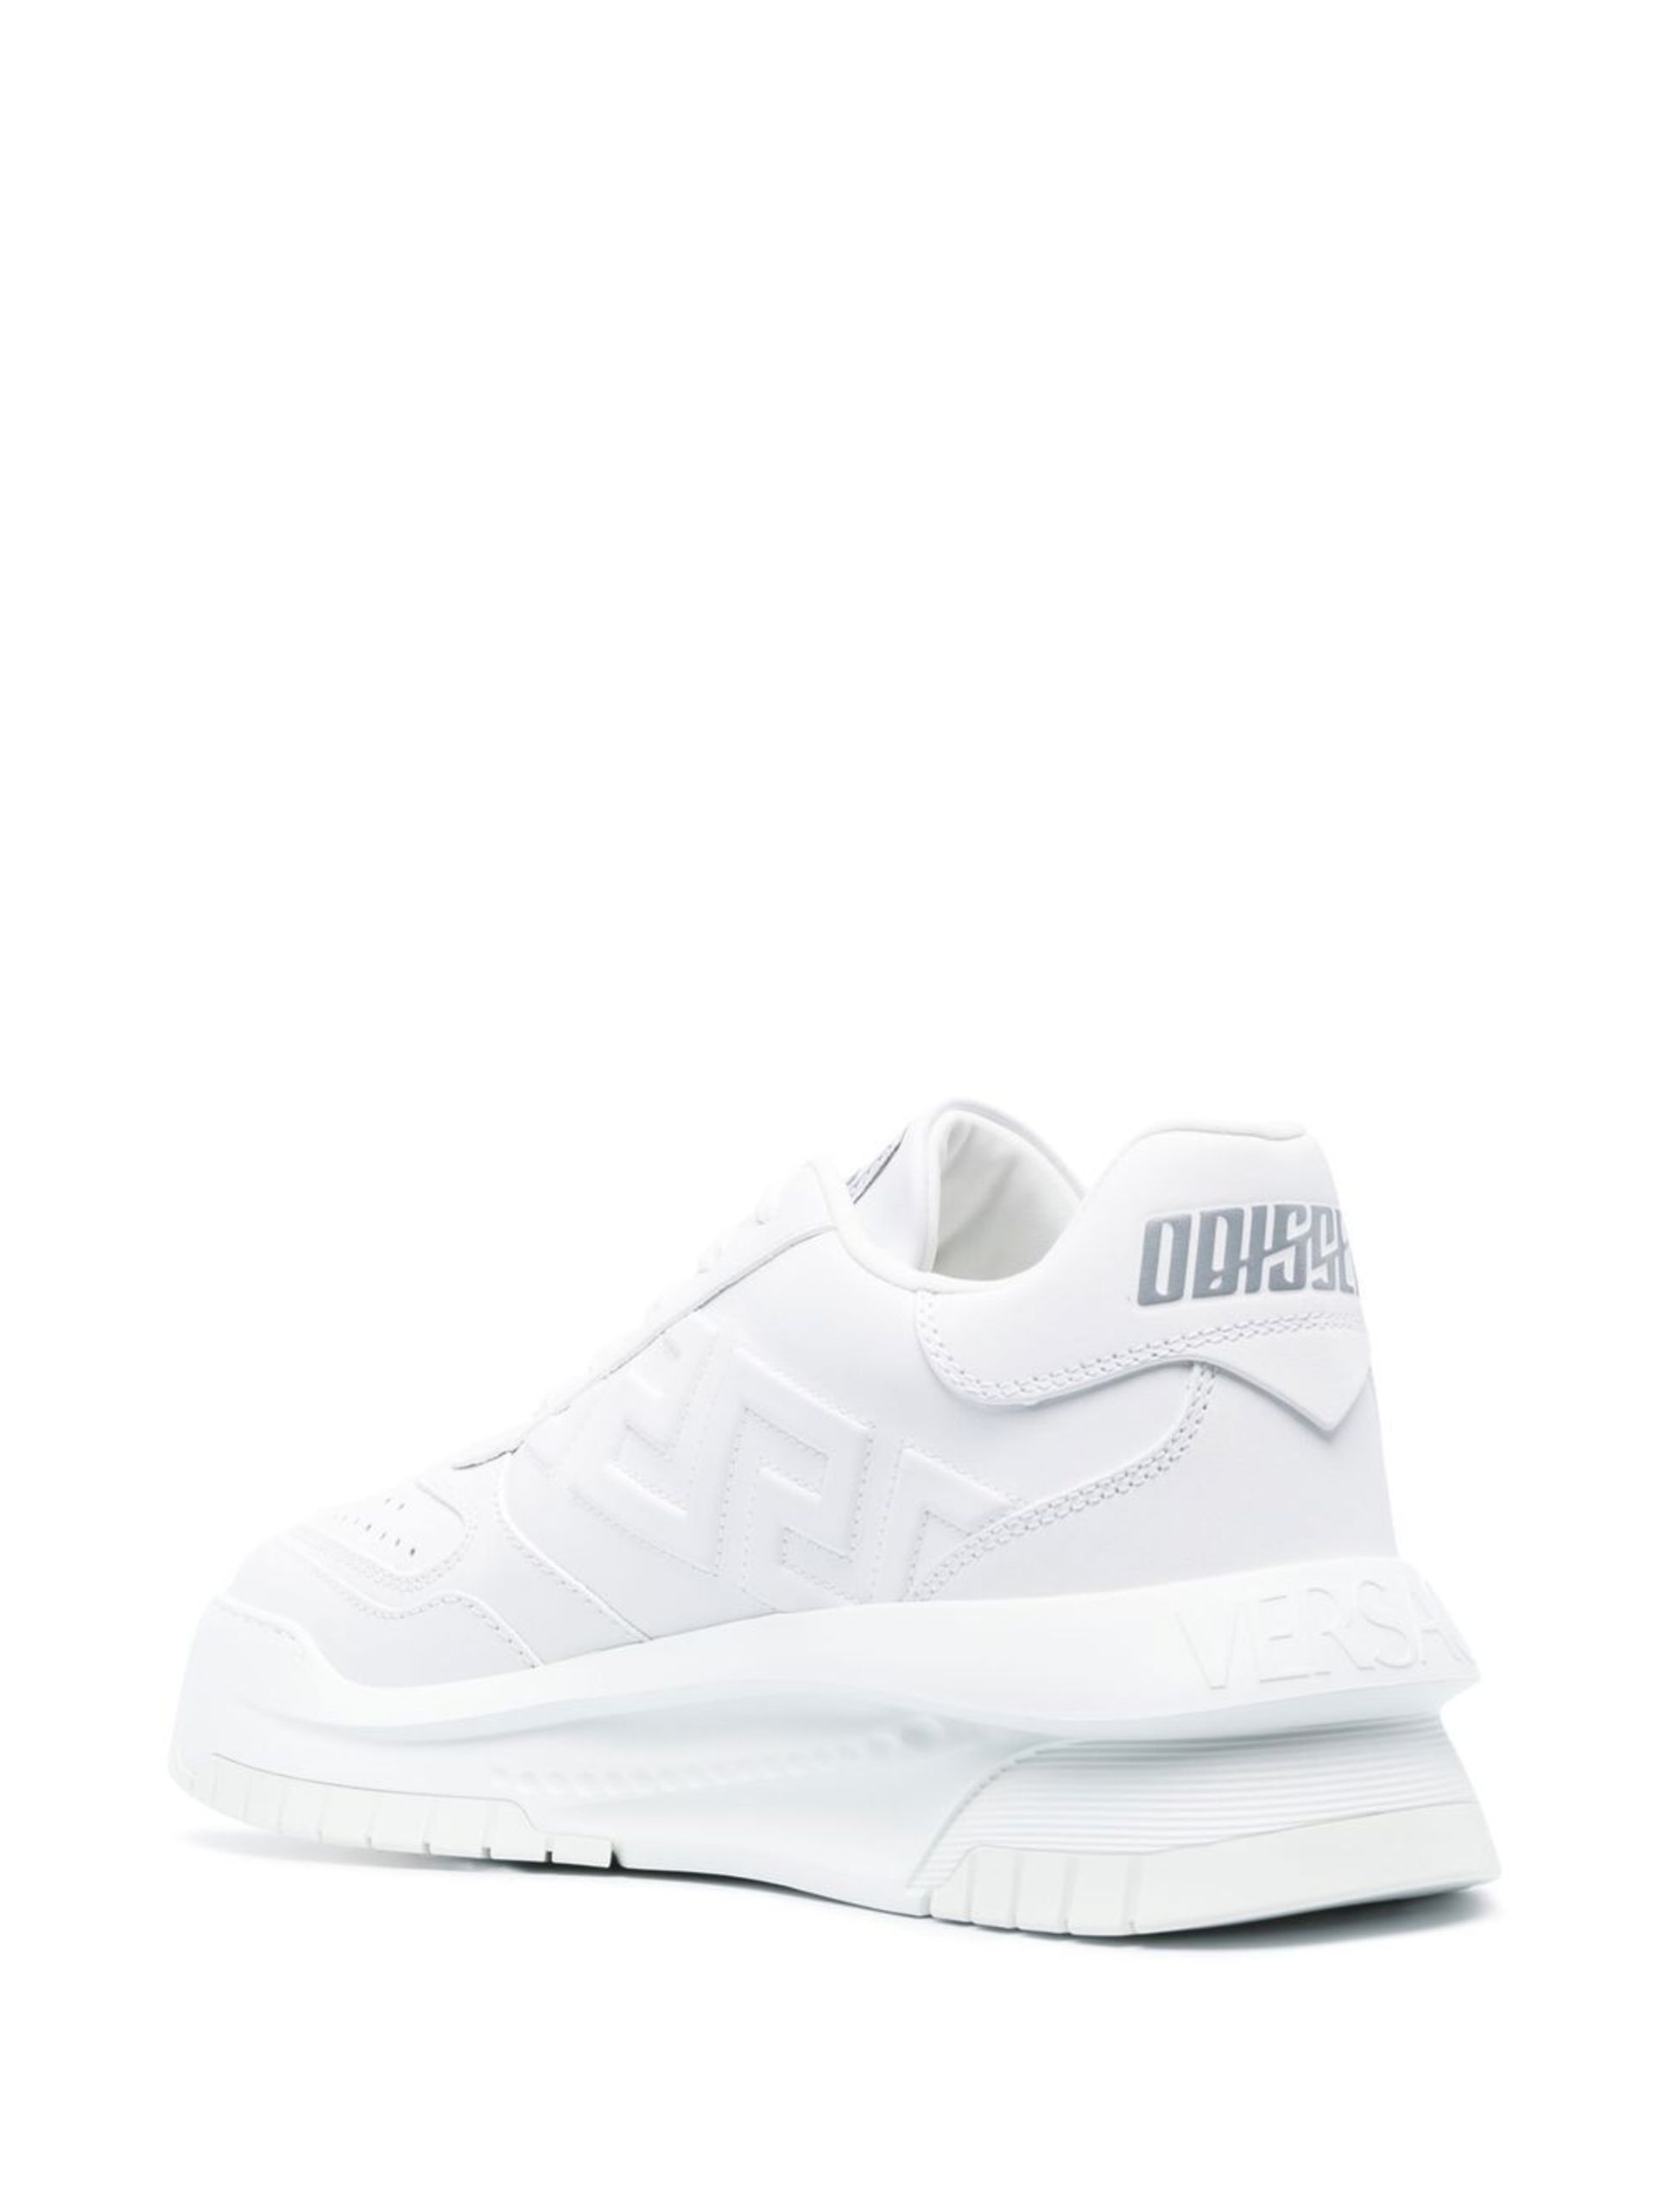 white Odissea leather sneakers - 3